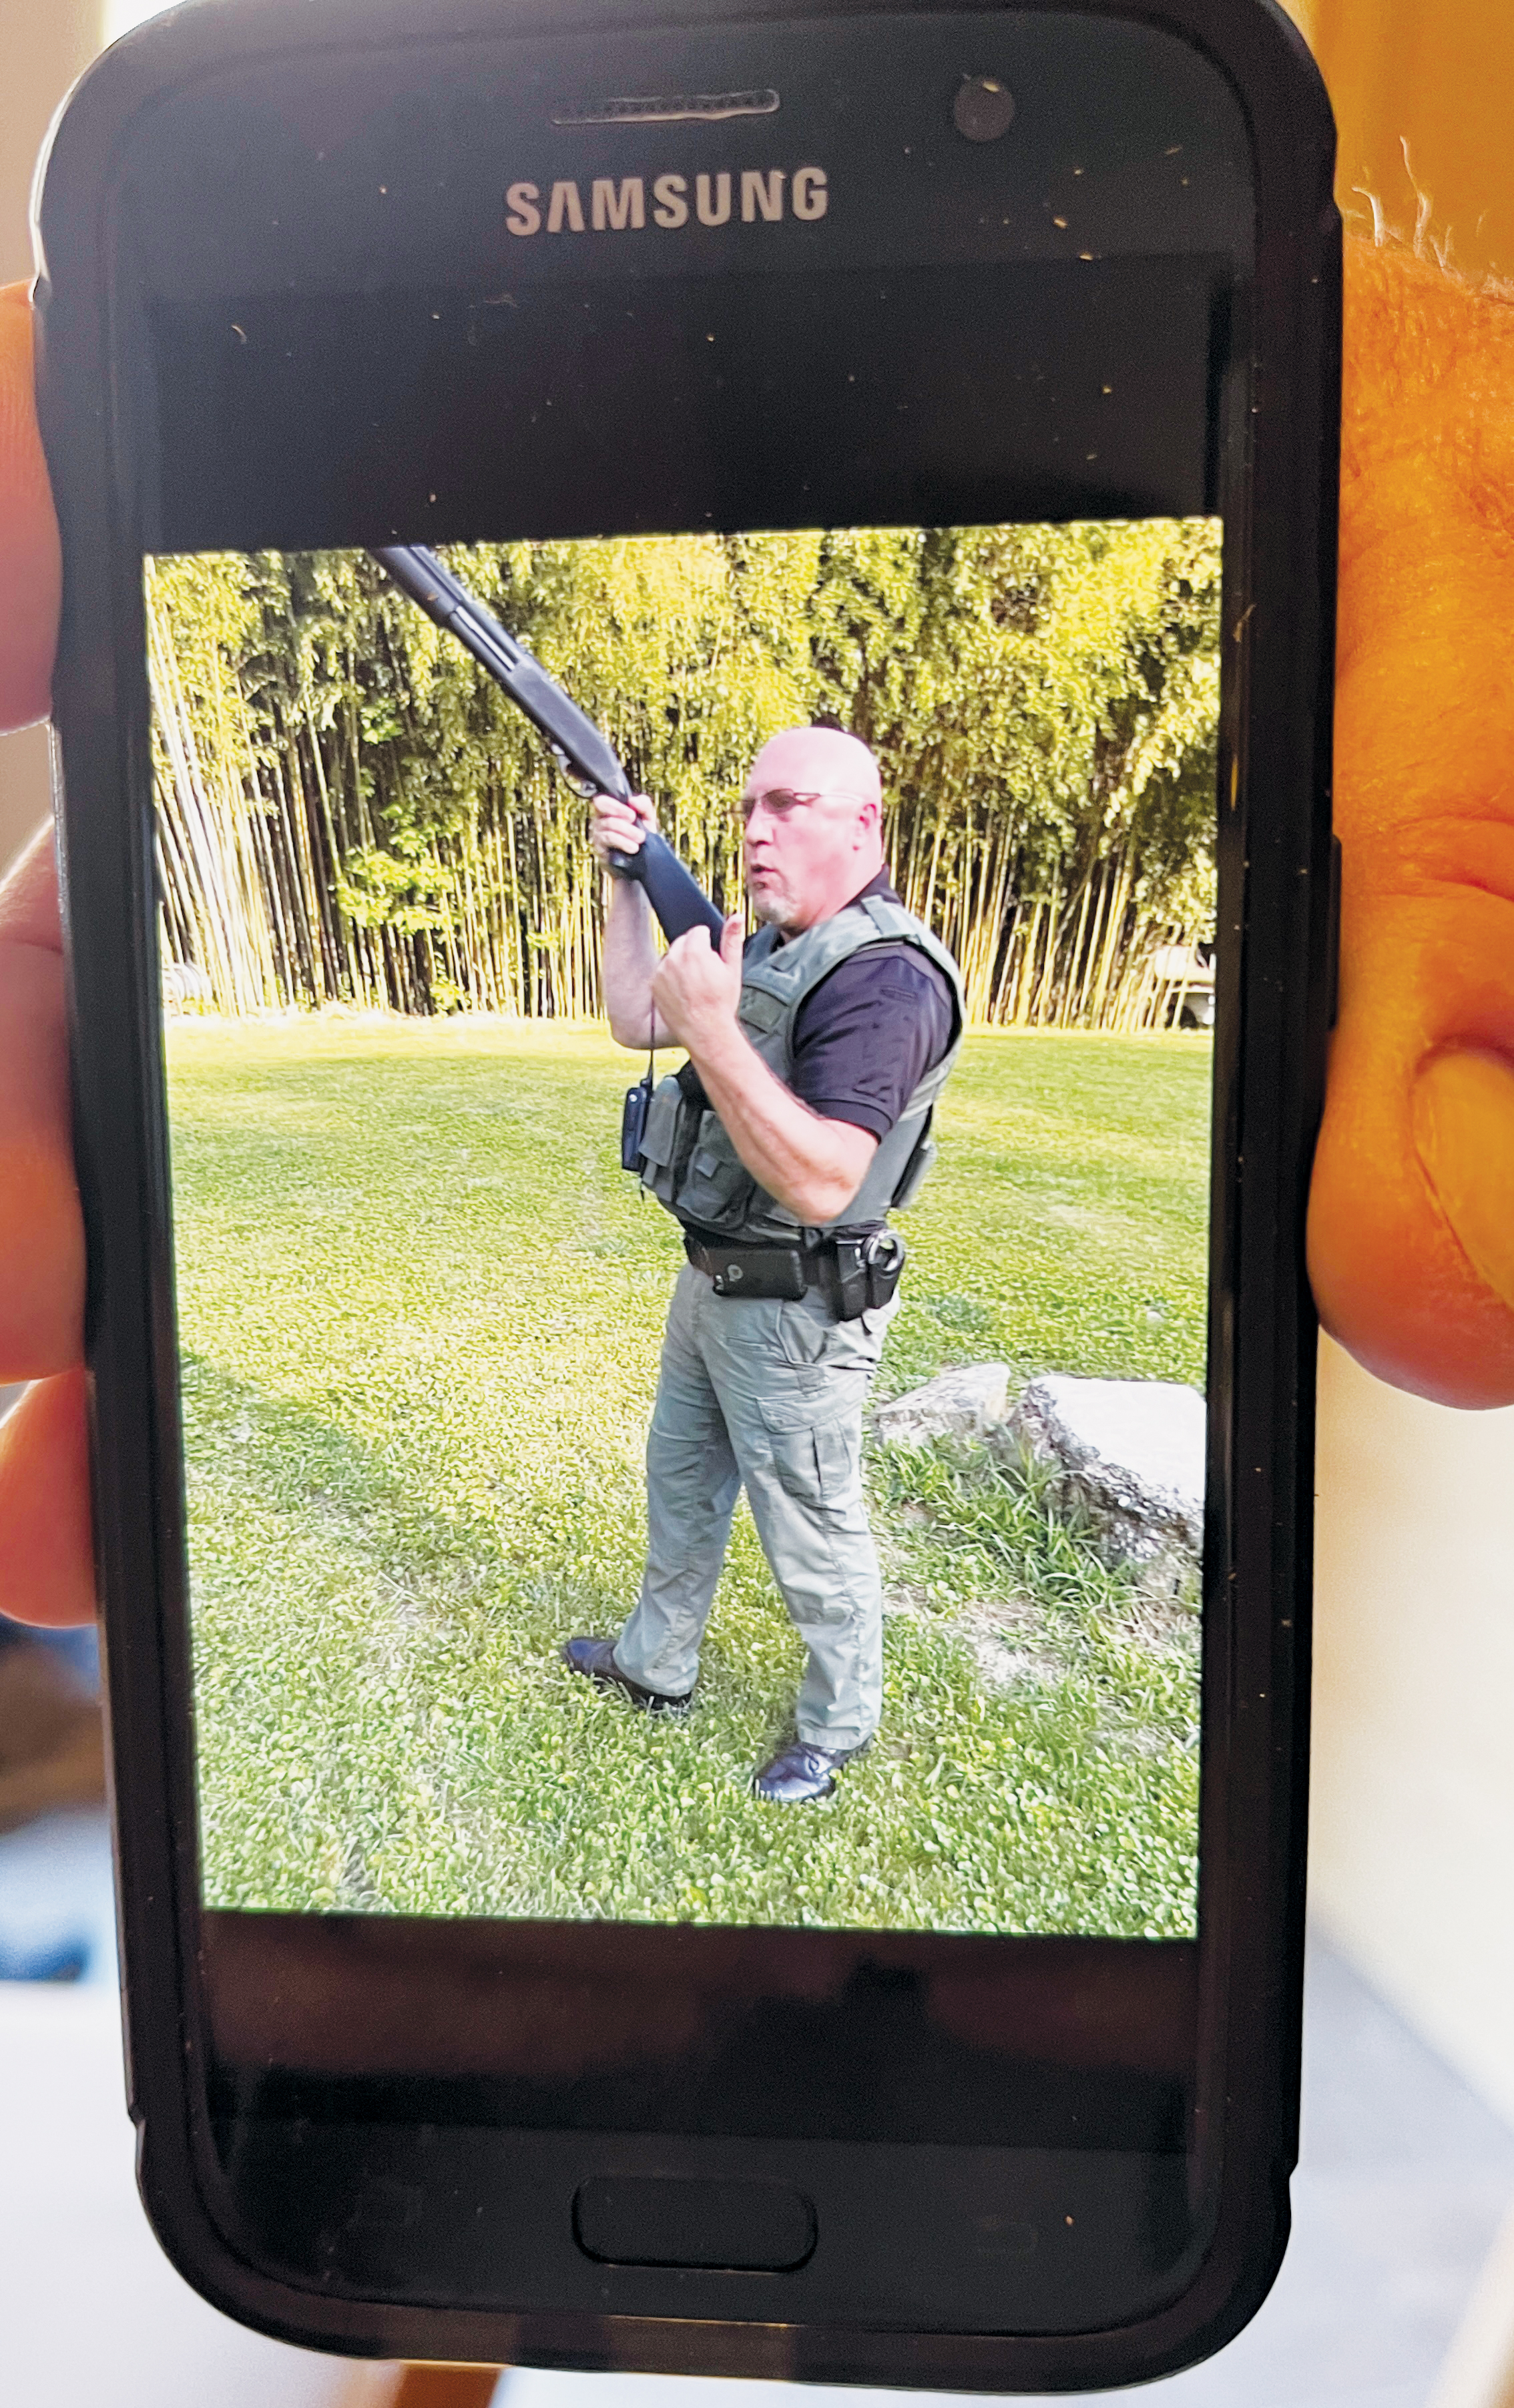 Gerry Laschober shows a photo taken on his cell phone in June 2017, when the search for a missing hunting dog ended with officers on his property at Cooper Creek Trout Farm in Ela. After asking the officers to leave, then-Swain County Sheriff’s Office Lt. Charles Robinson allegedly wielded this shotgun and told Laschober he was going to “cut him in half.”